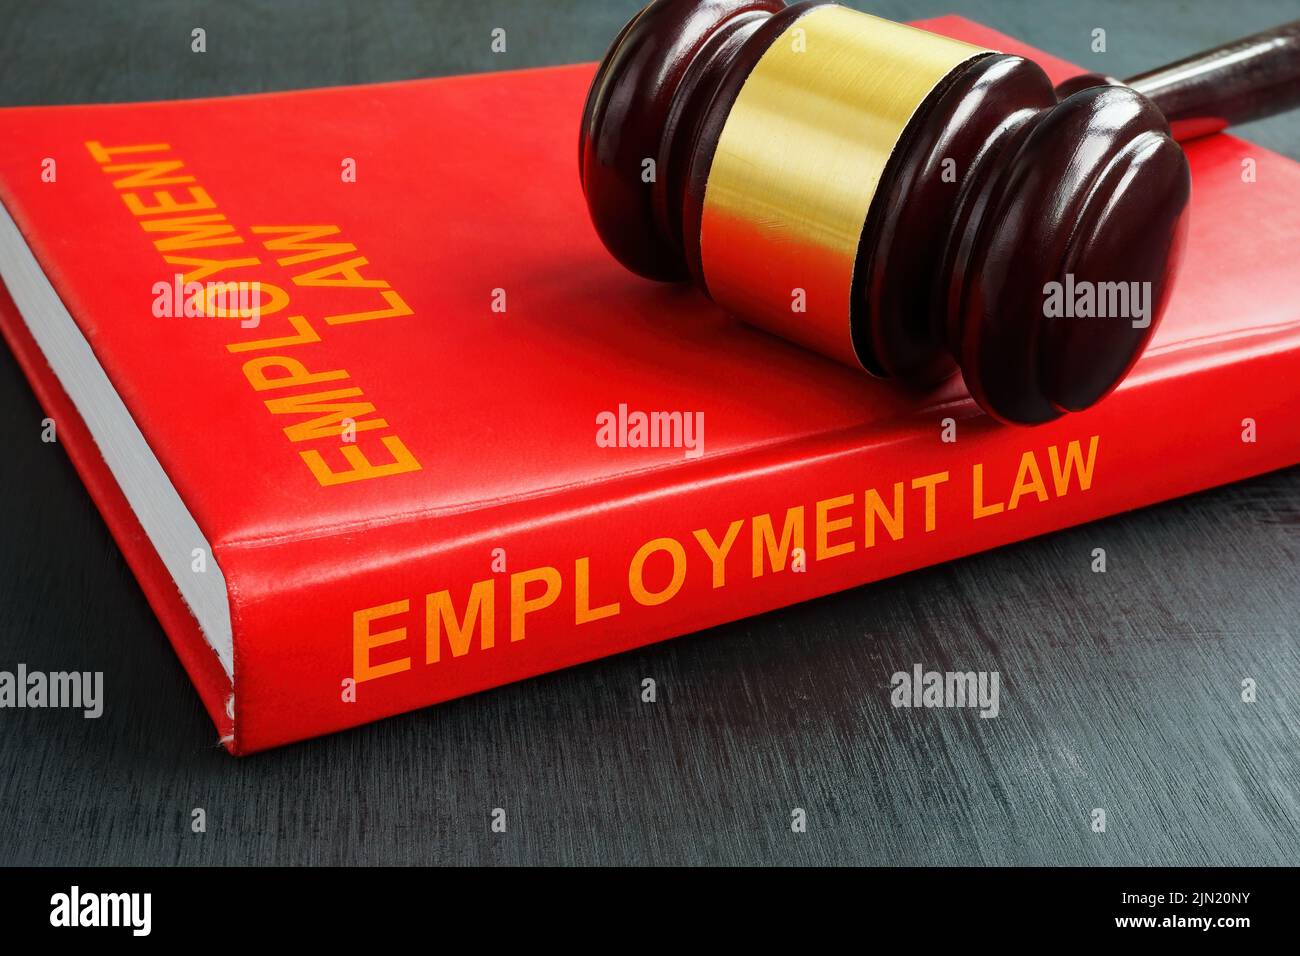 The book employment law and the gavel on it. Stock Photo